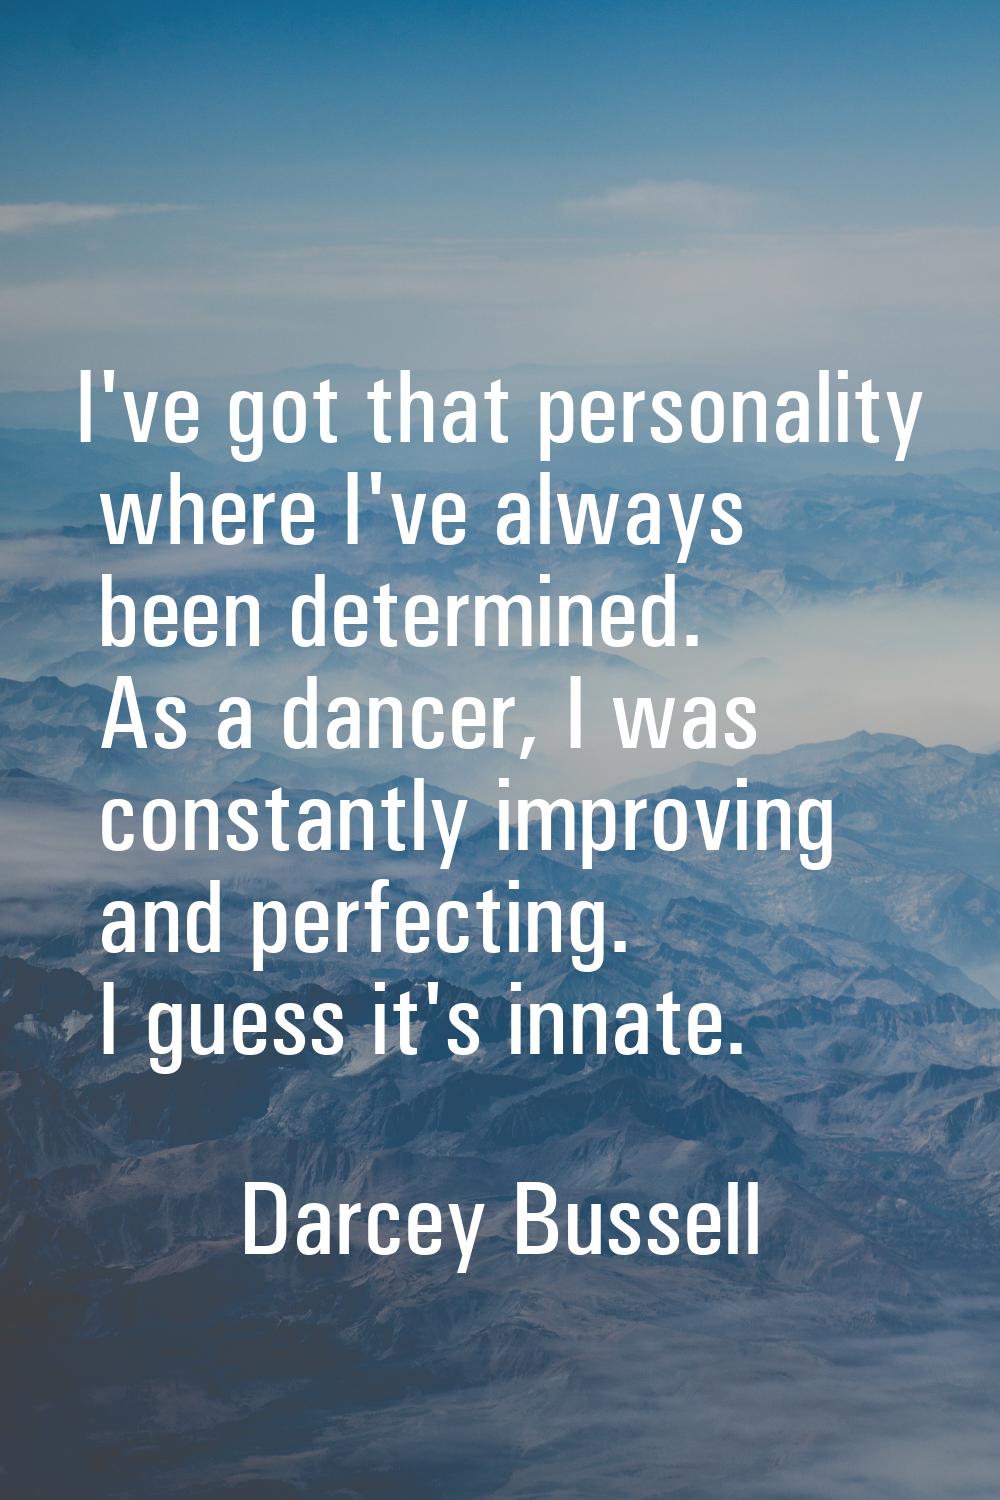 I've got that personality where I've always been determined. As a dancer, I was constantly improvin